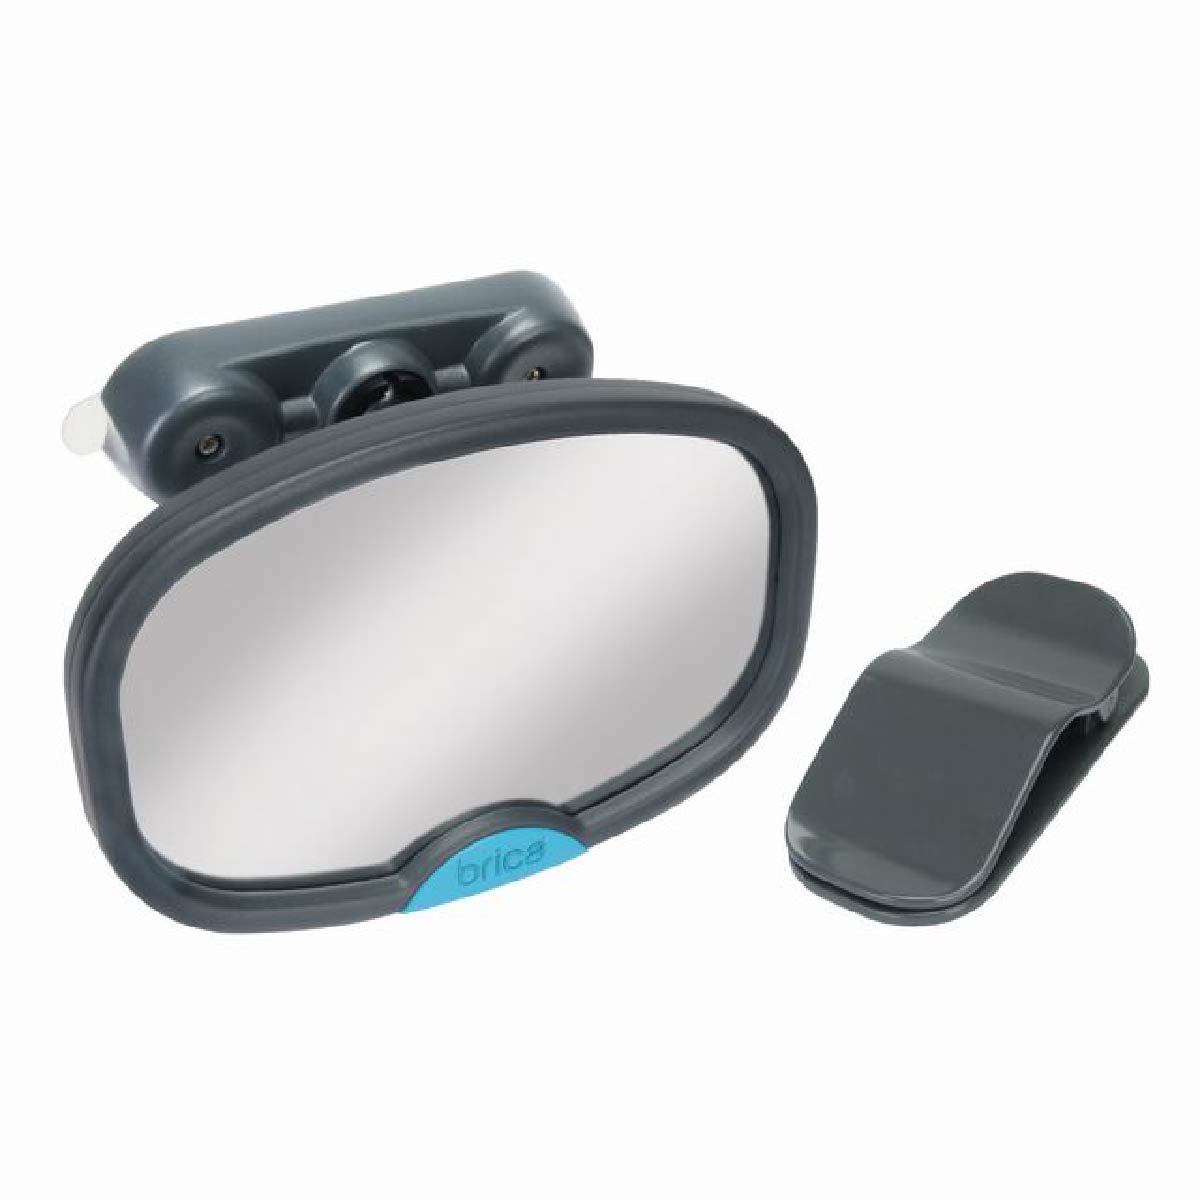 Brica Dualsight Clear Sight Baby Mirror